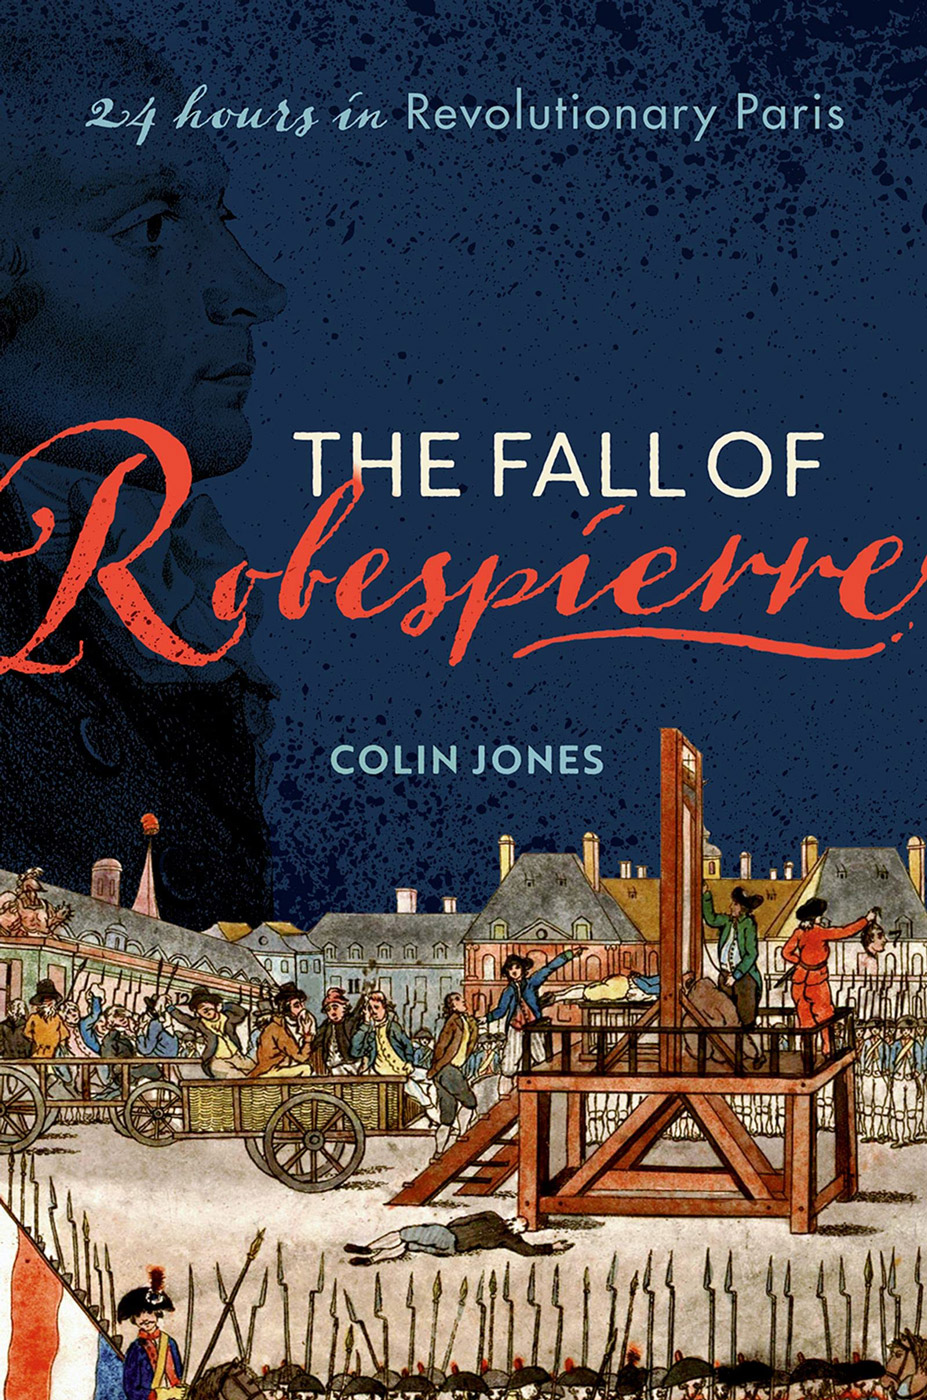 The Fall of Robespierre by Colin Jones book cover, text over illustration of crowd surrounding a guillotine